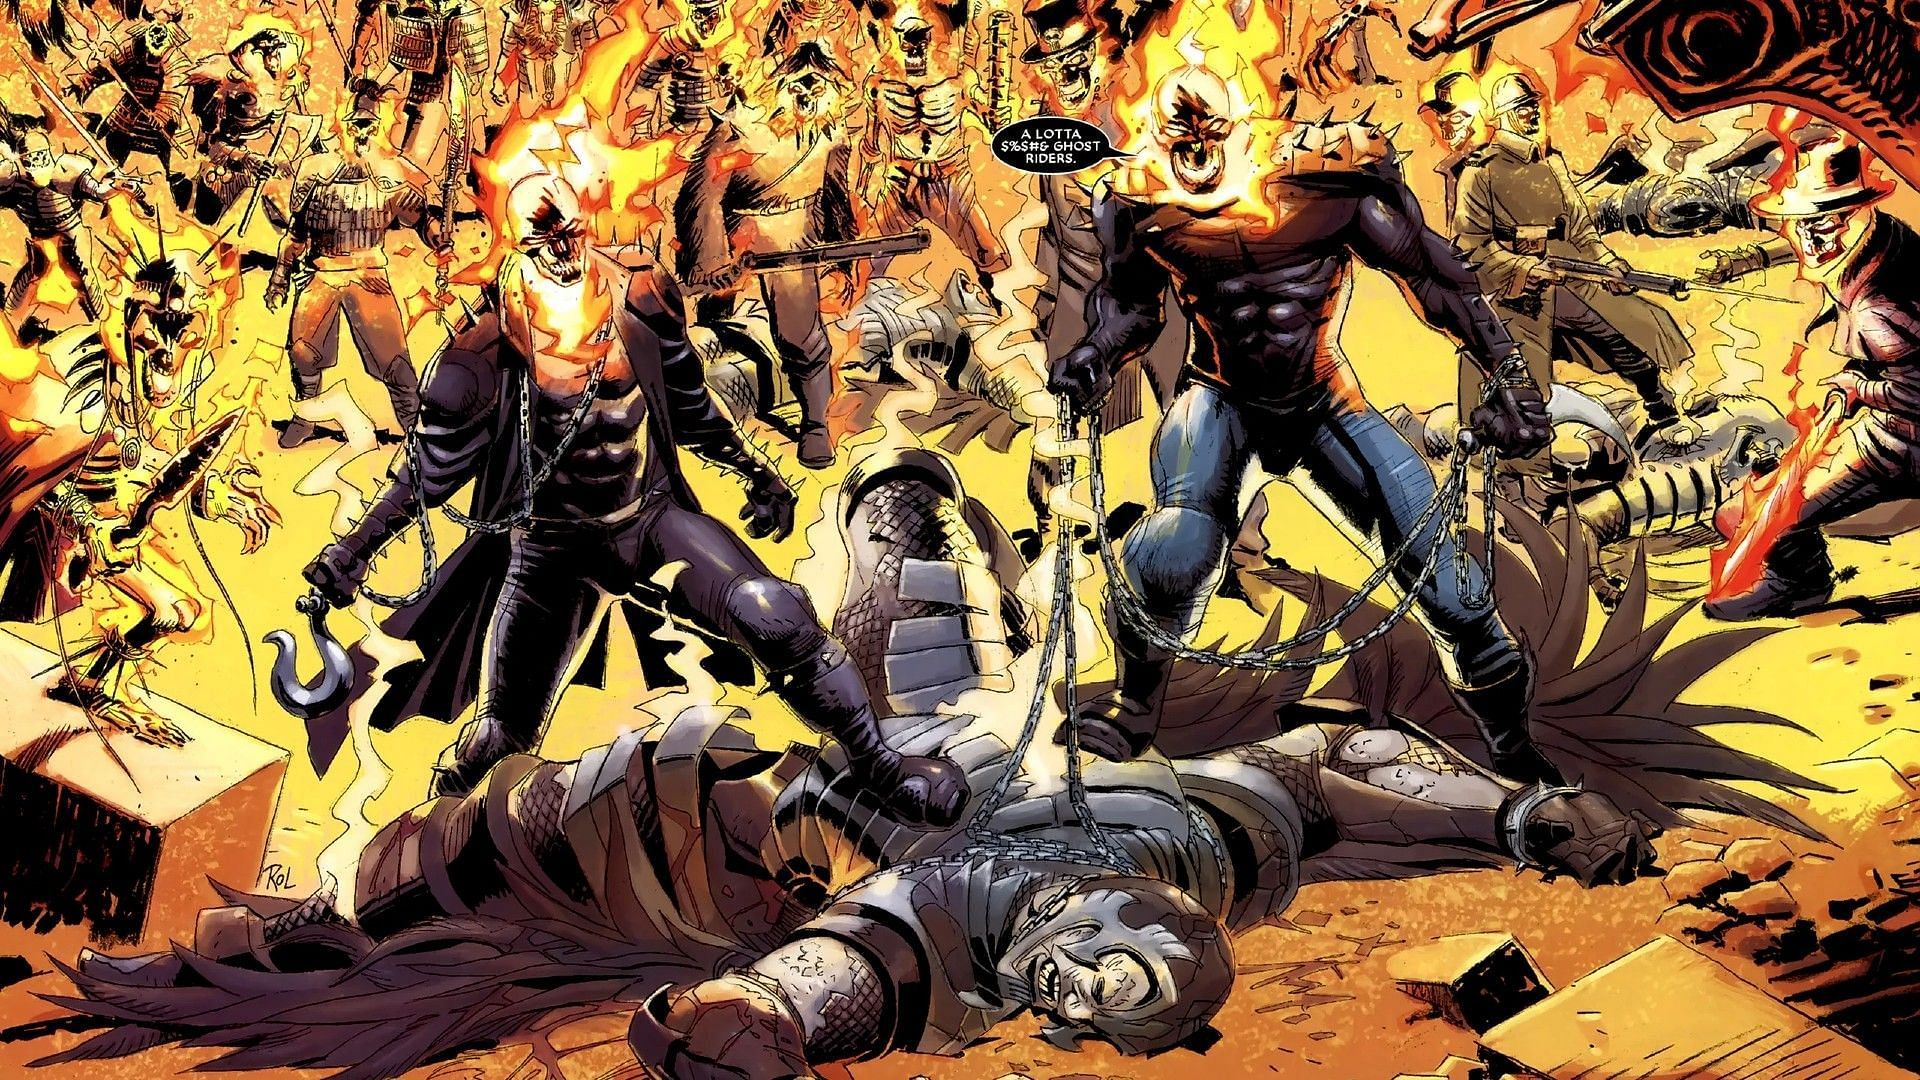 Ghost Rider is most associated with these comics (Image via Marvel Comics)